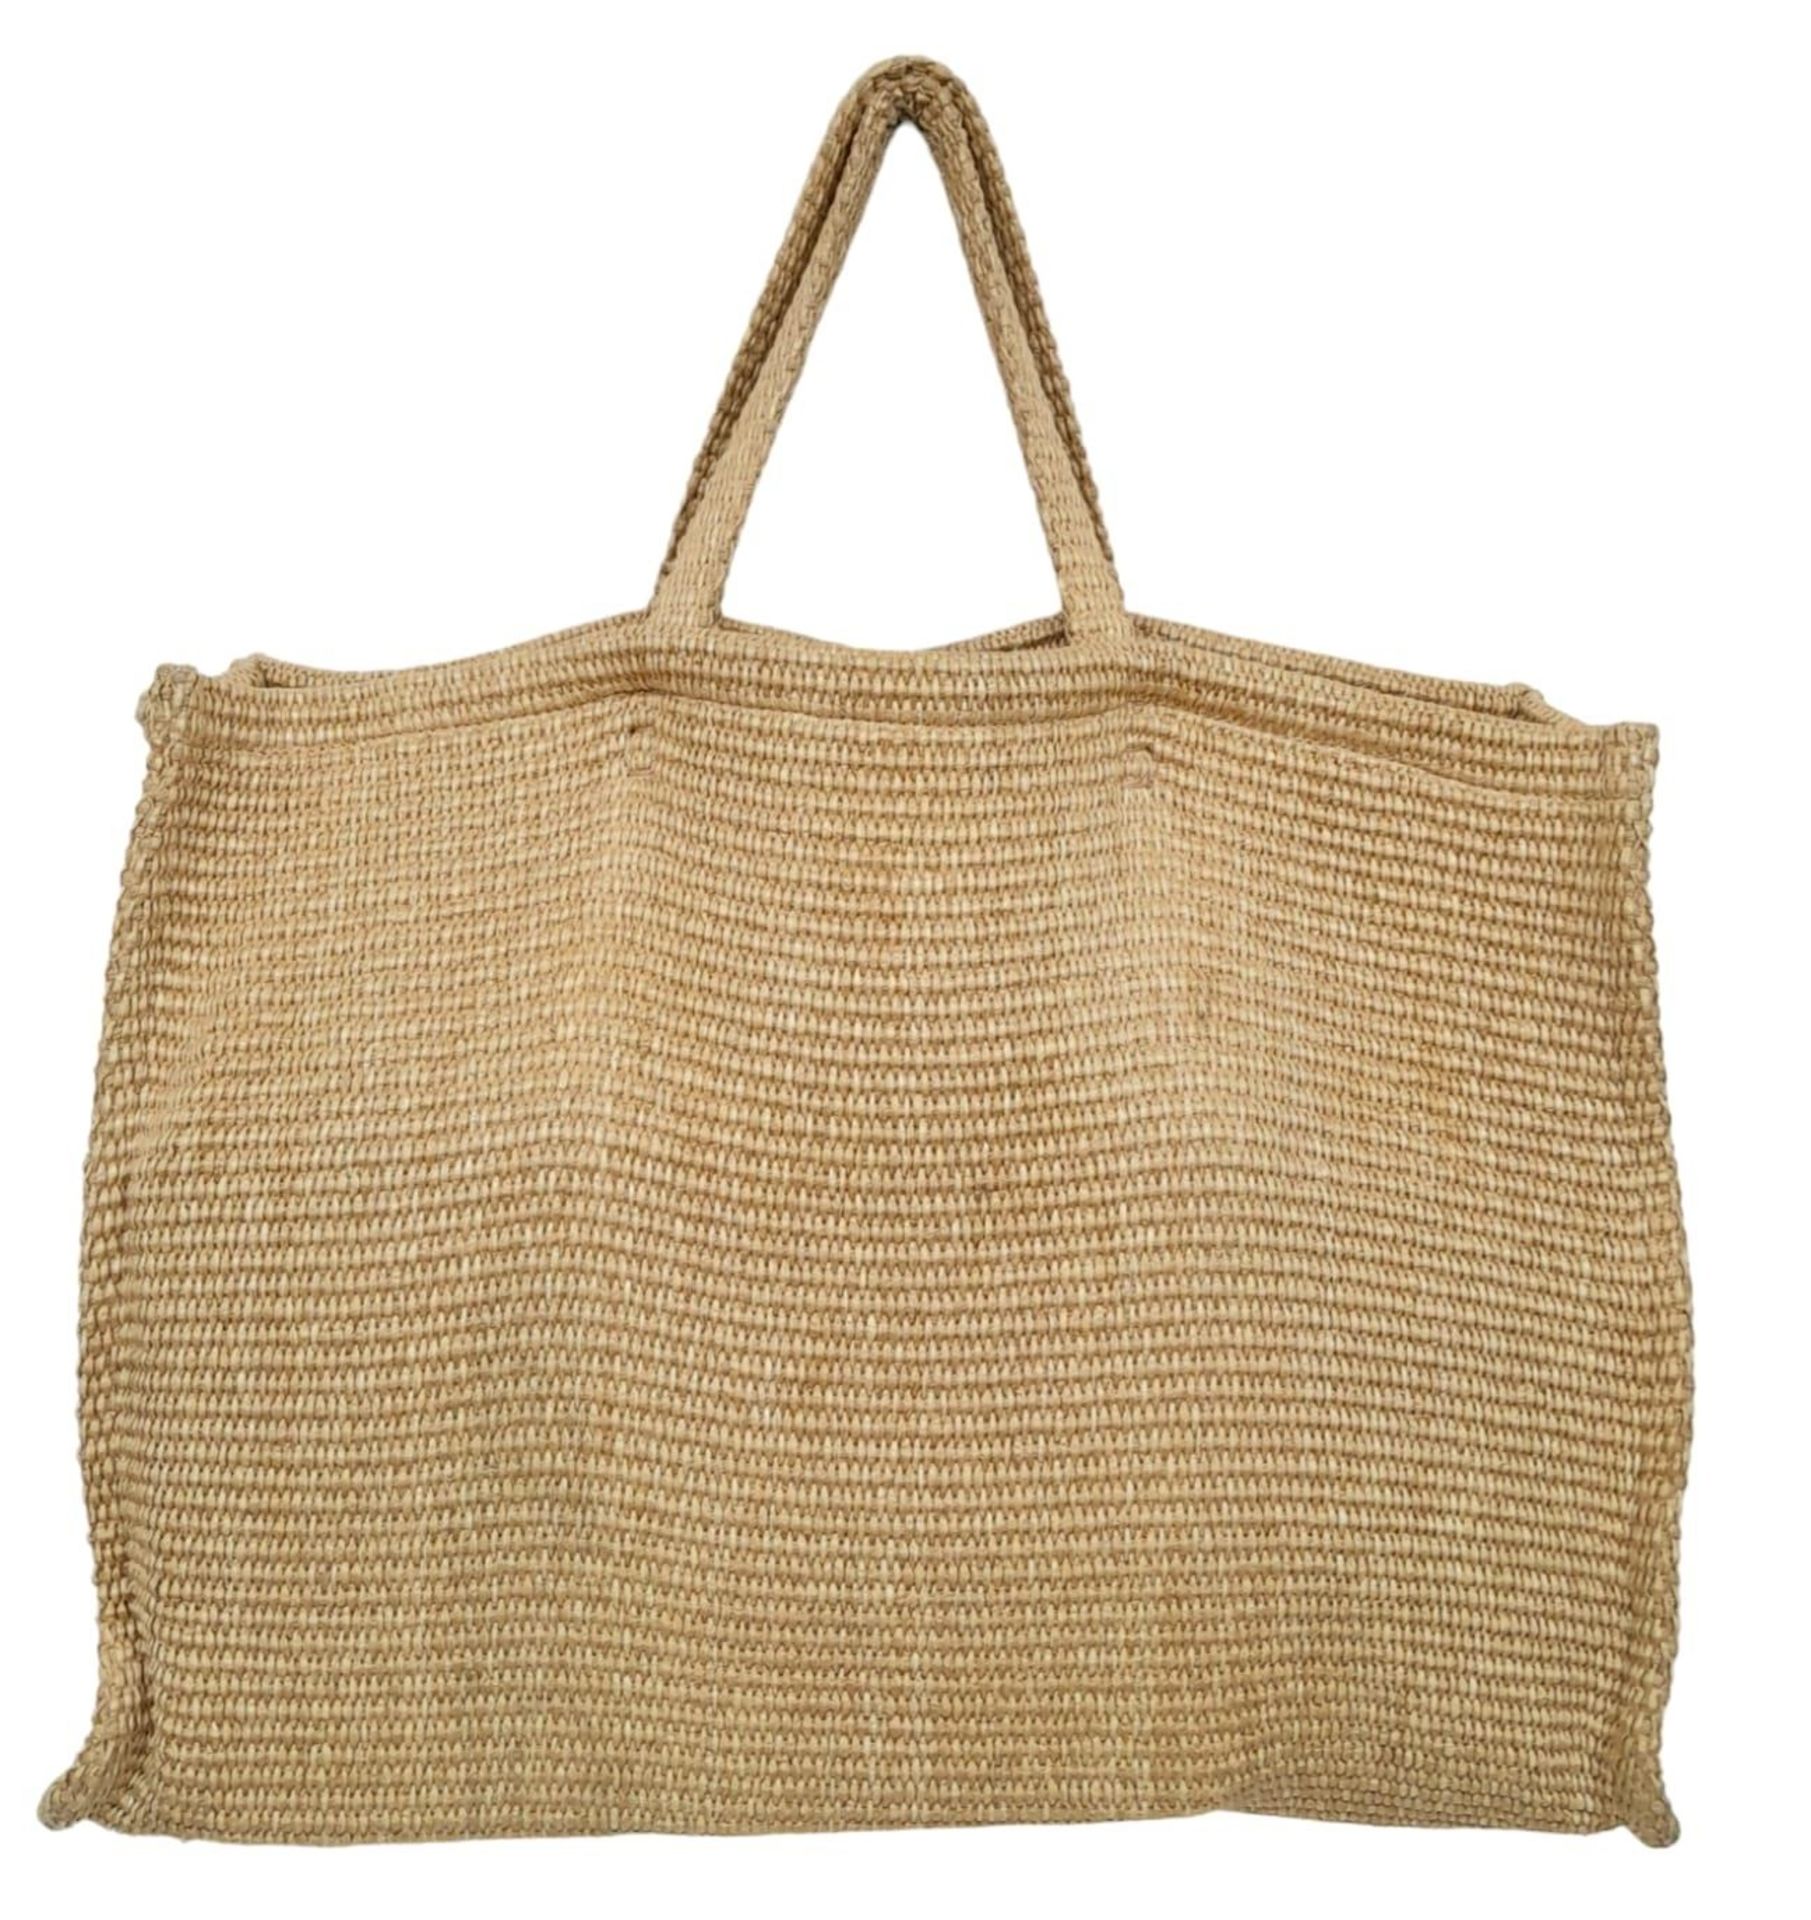 A Givenchy Raffia Tote Bag. Woven textile exterior with two straps. Woven textile interior with an - Image 3 of 5